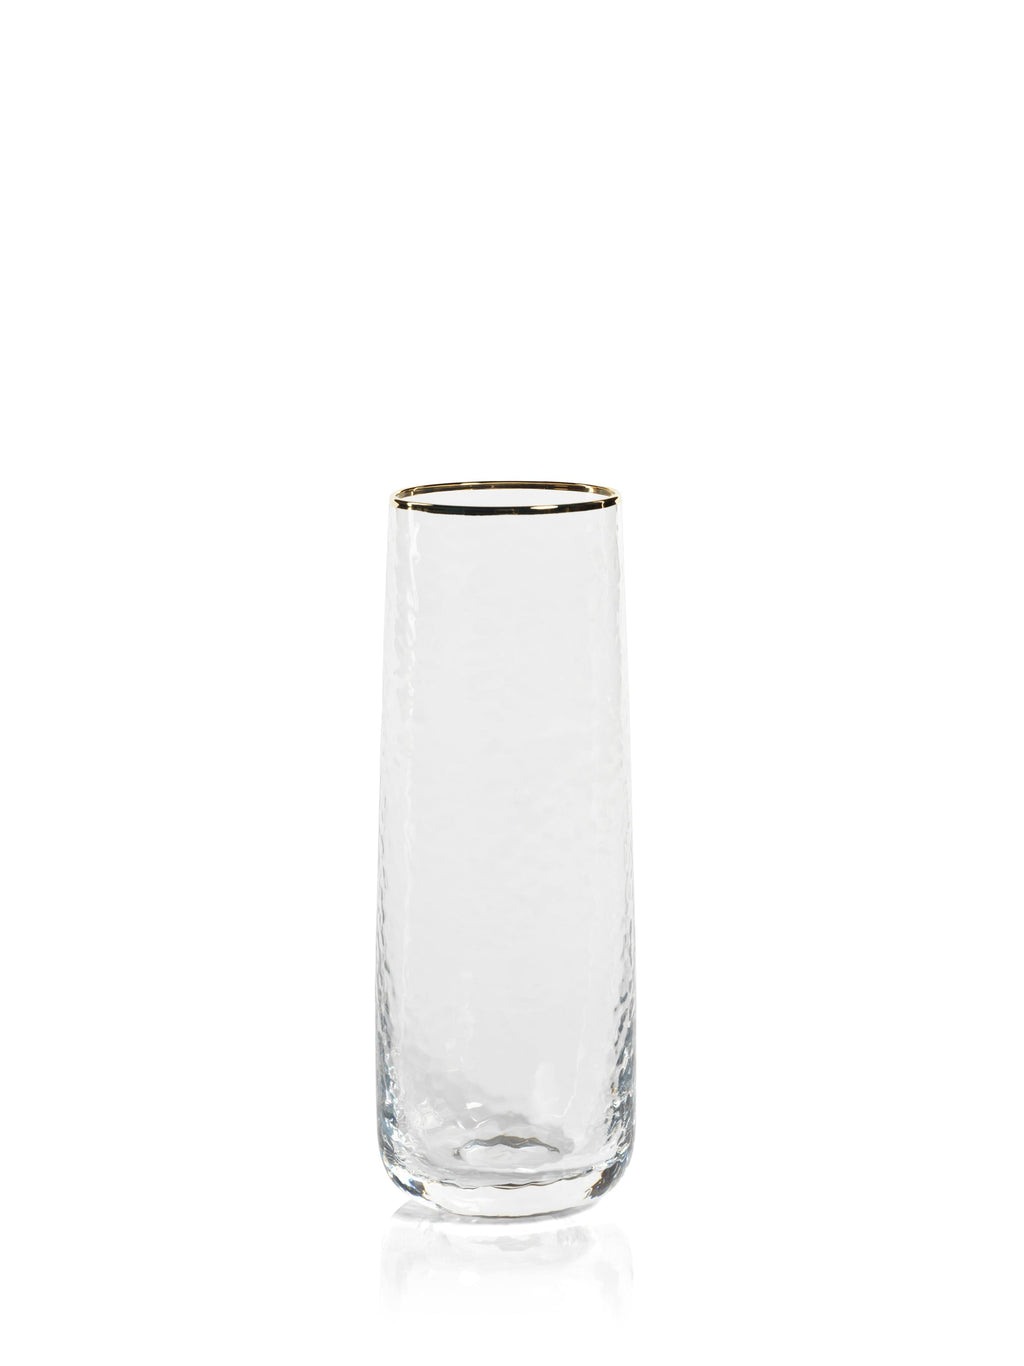 cappelletti stemless glass flutes set of 4 by zodax ch 6215 1